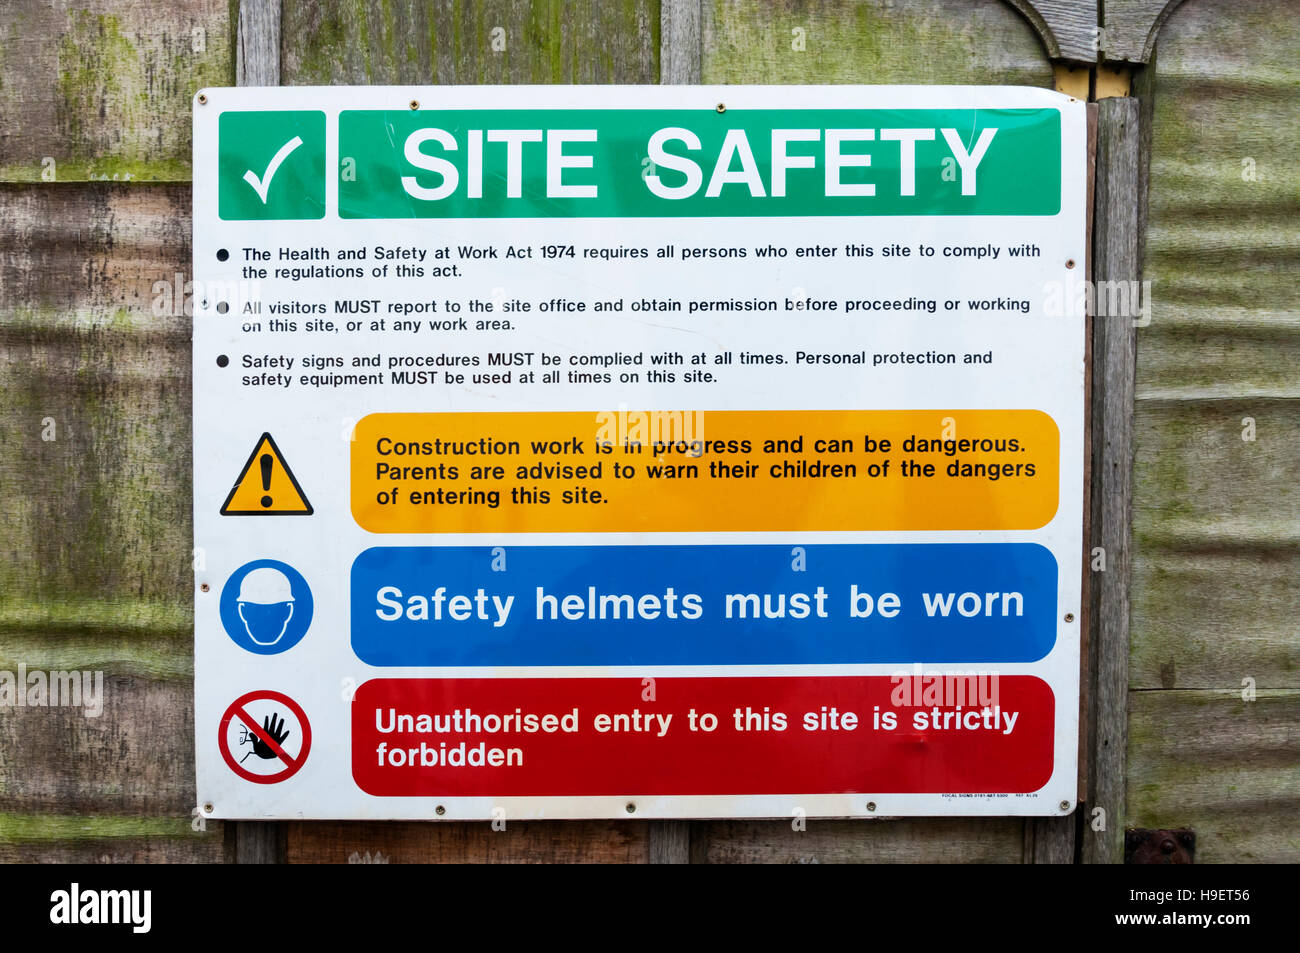 Site safety notices at the entrance to a construction site. Stock Photo